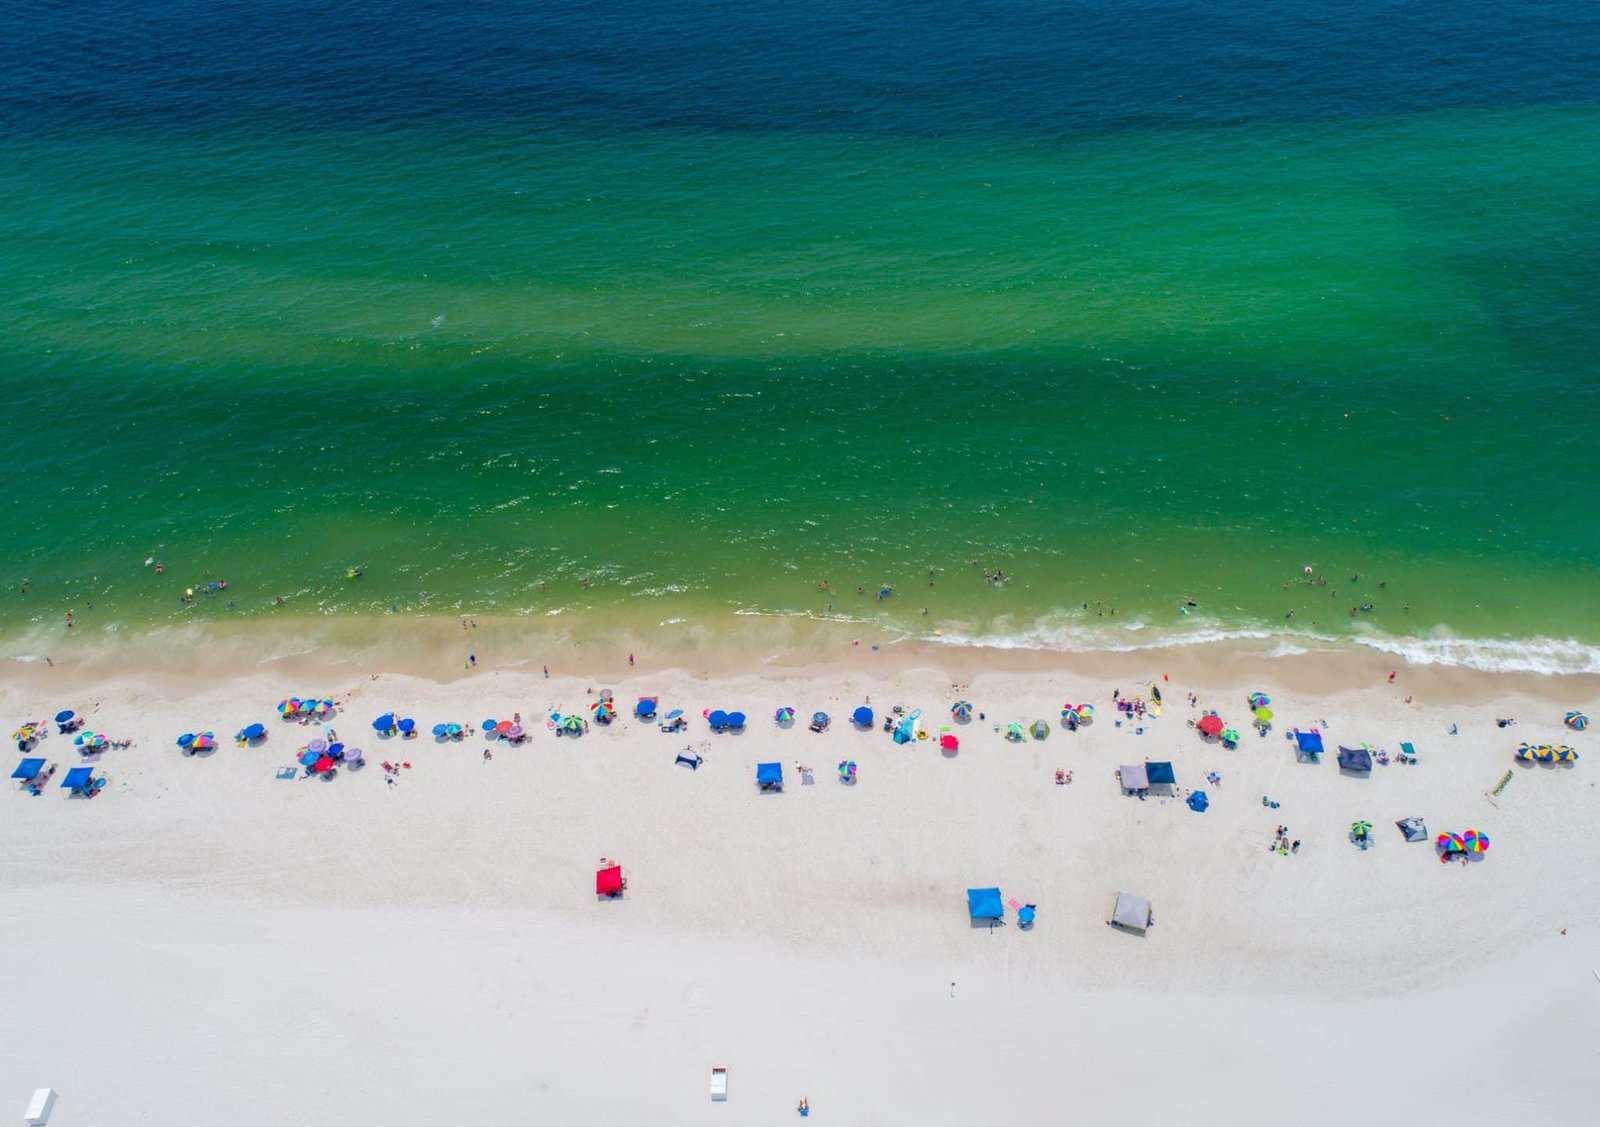 Gulf Shores, Alabama beach on a sunny day in June